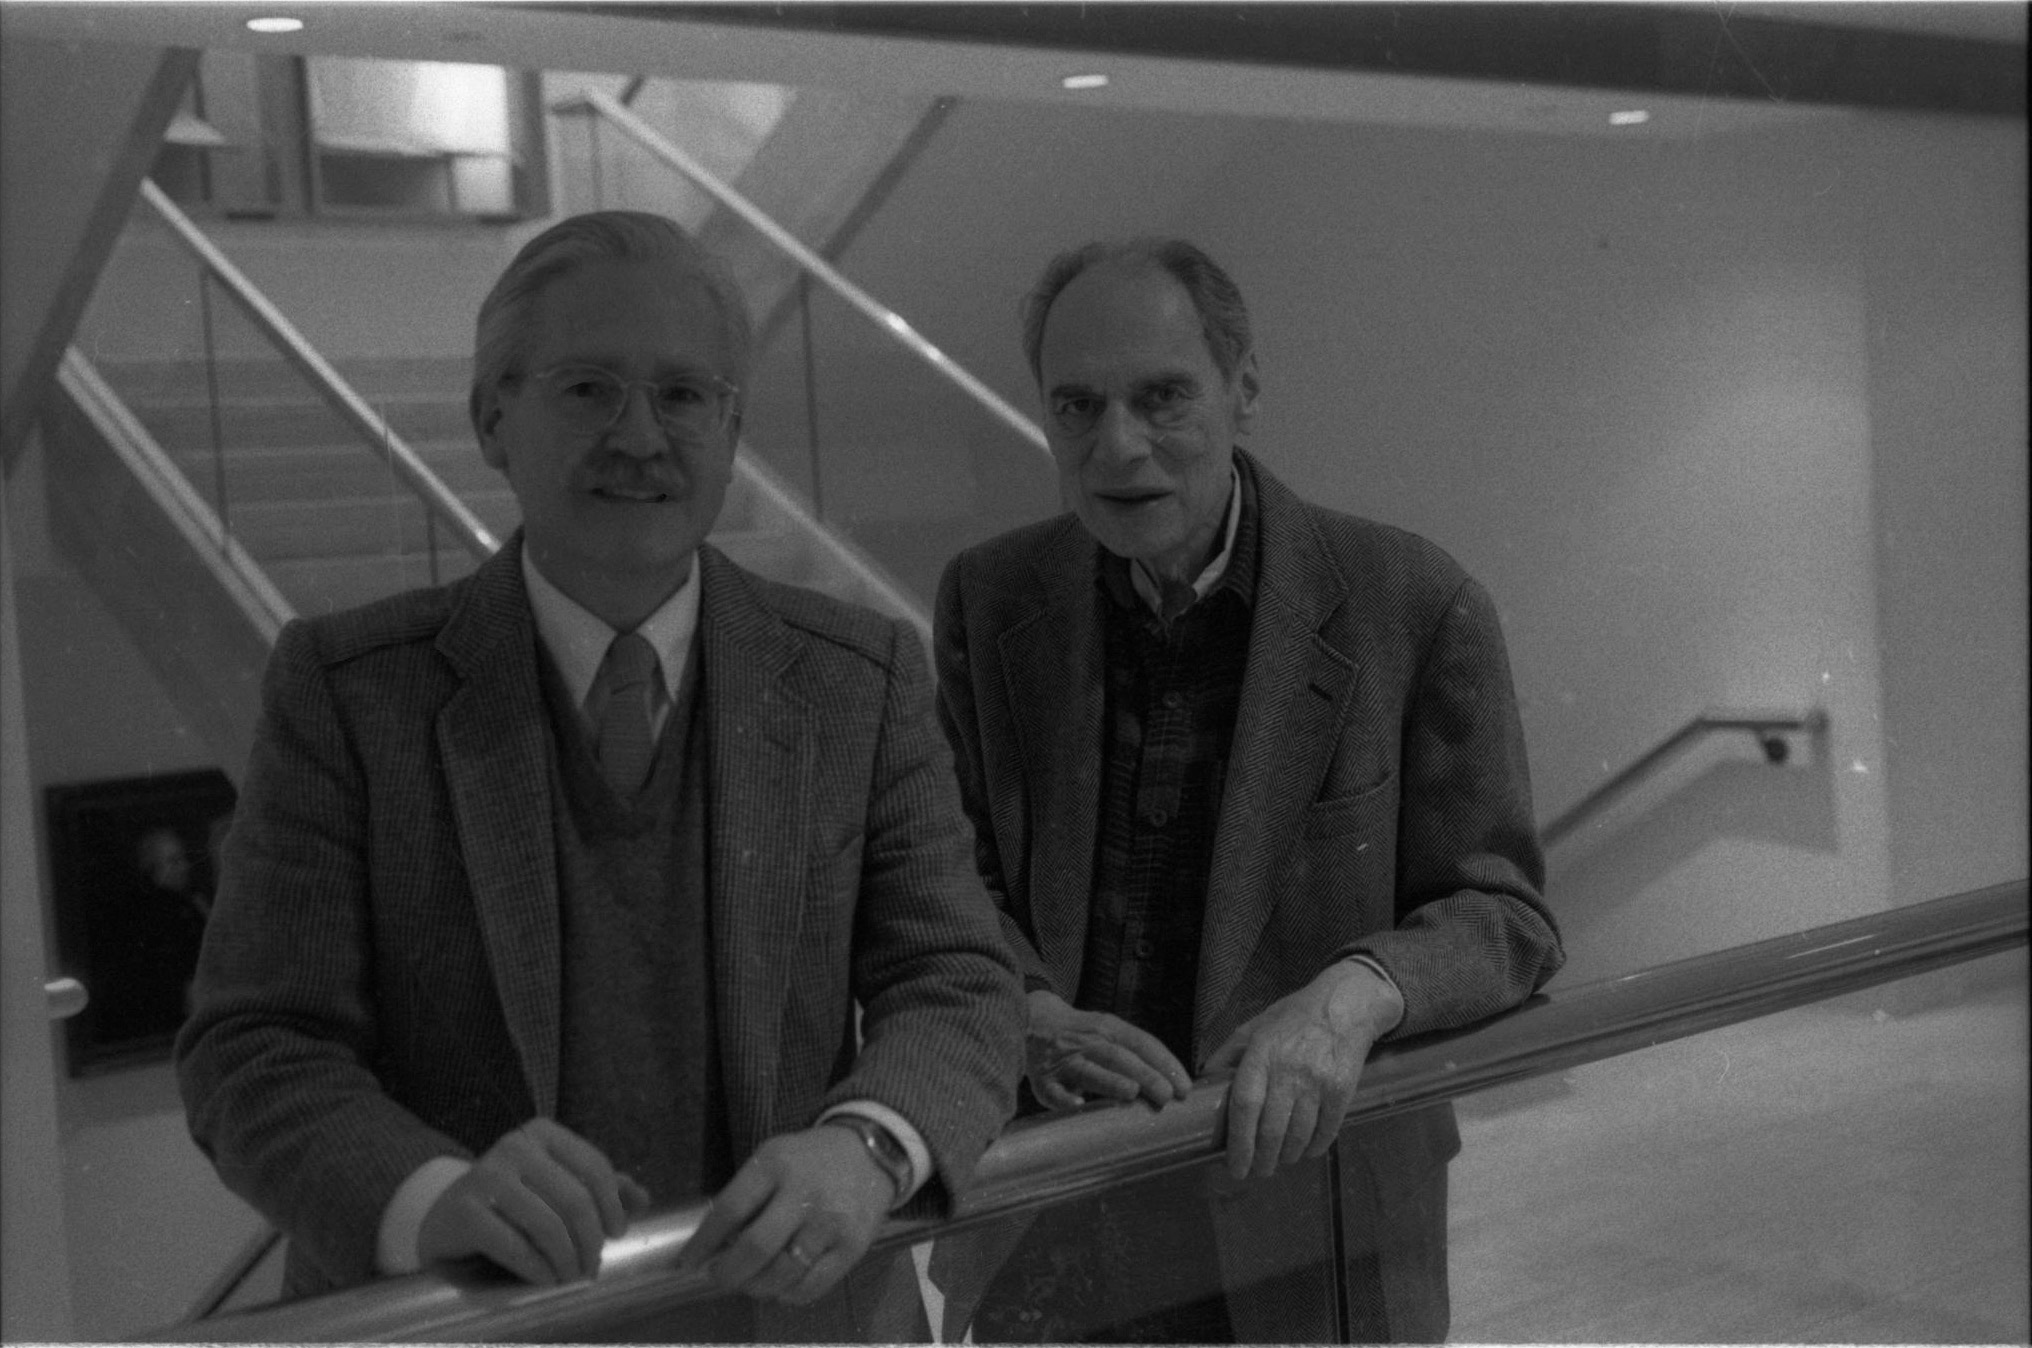 Dr. Mann and Dr. Weinert, photographed on December 16th, 1998 by Louis Ouzer.  Louis Ouzer Archive.  Master negative nos. R4341-7 and R4341-25.